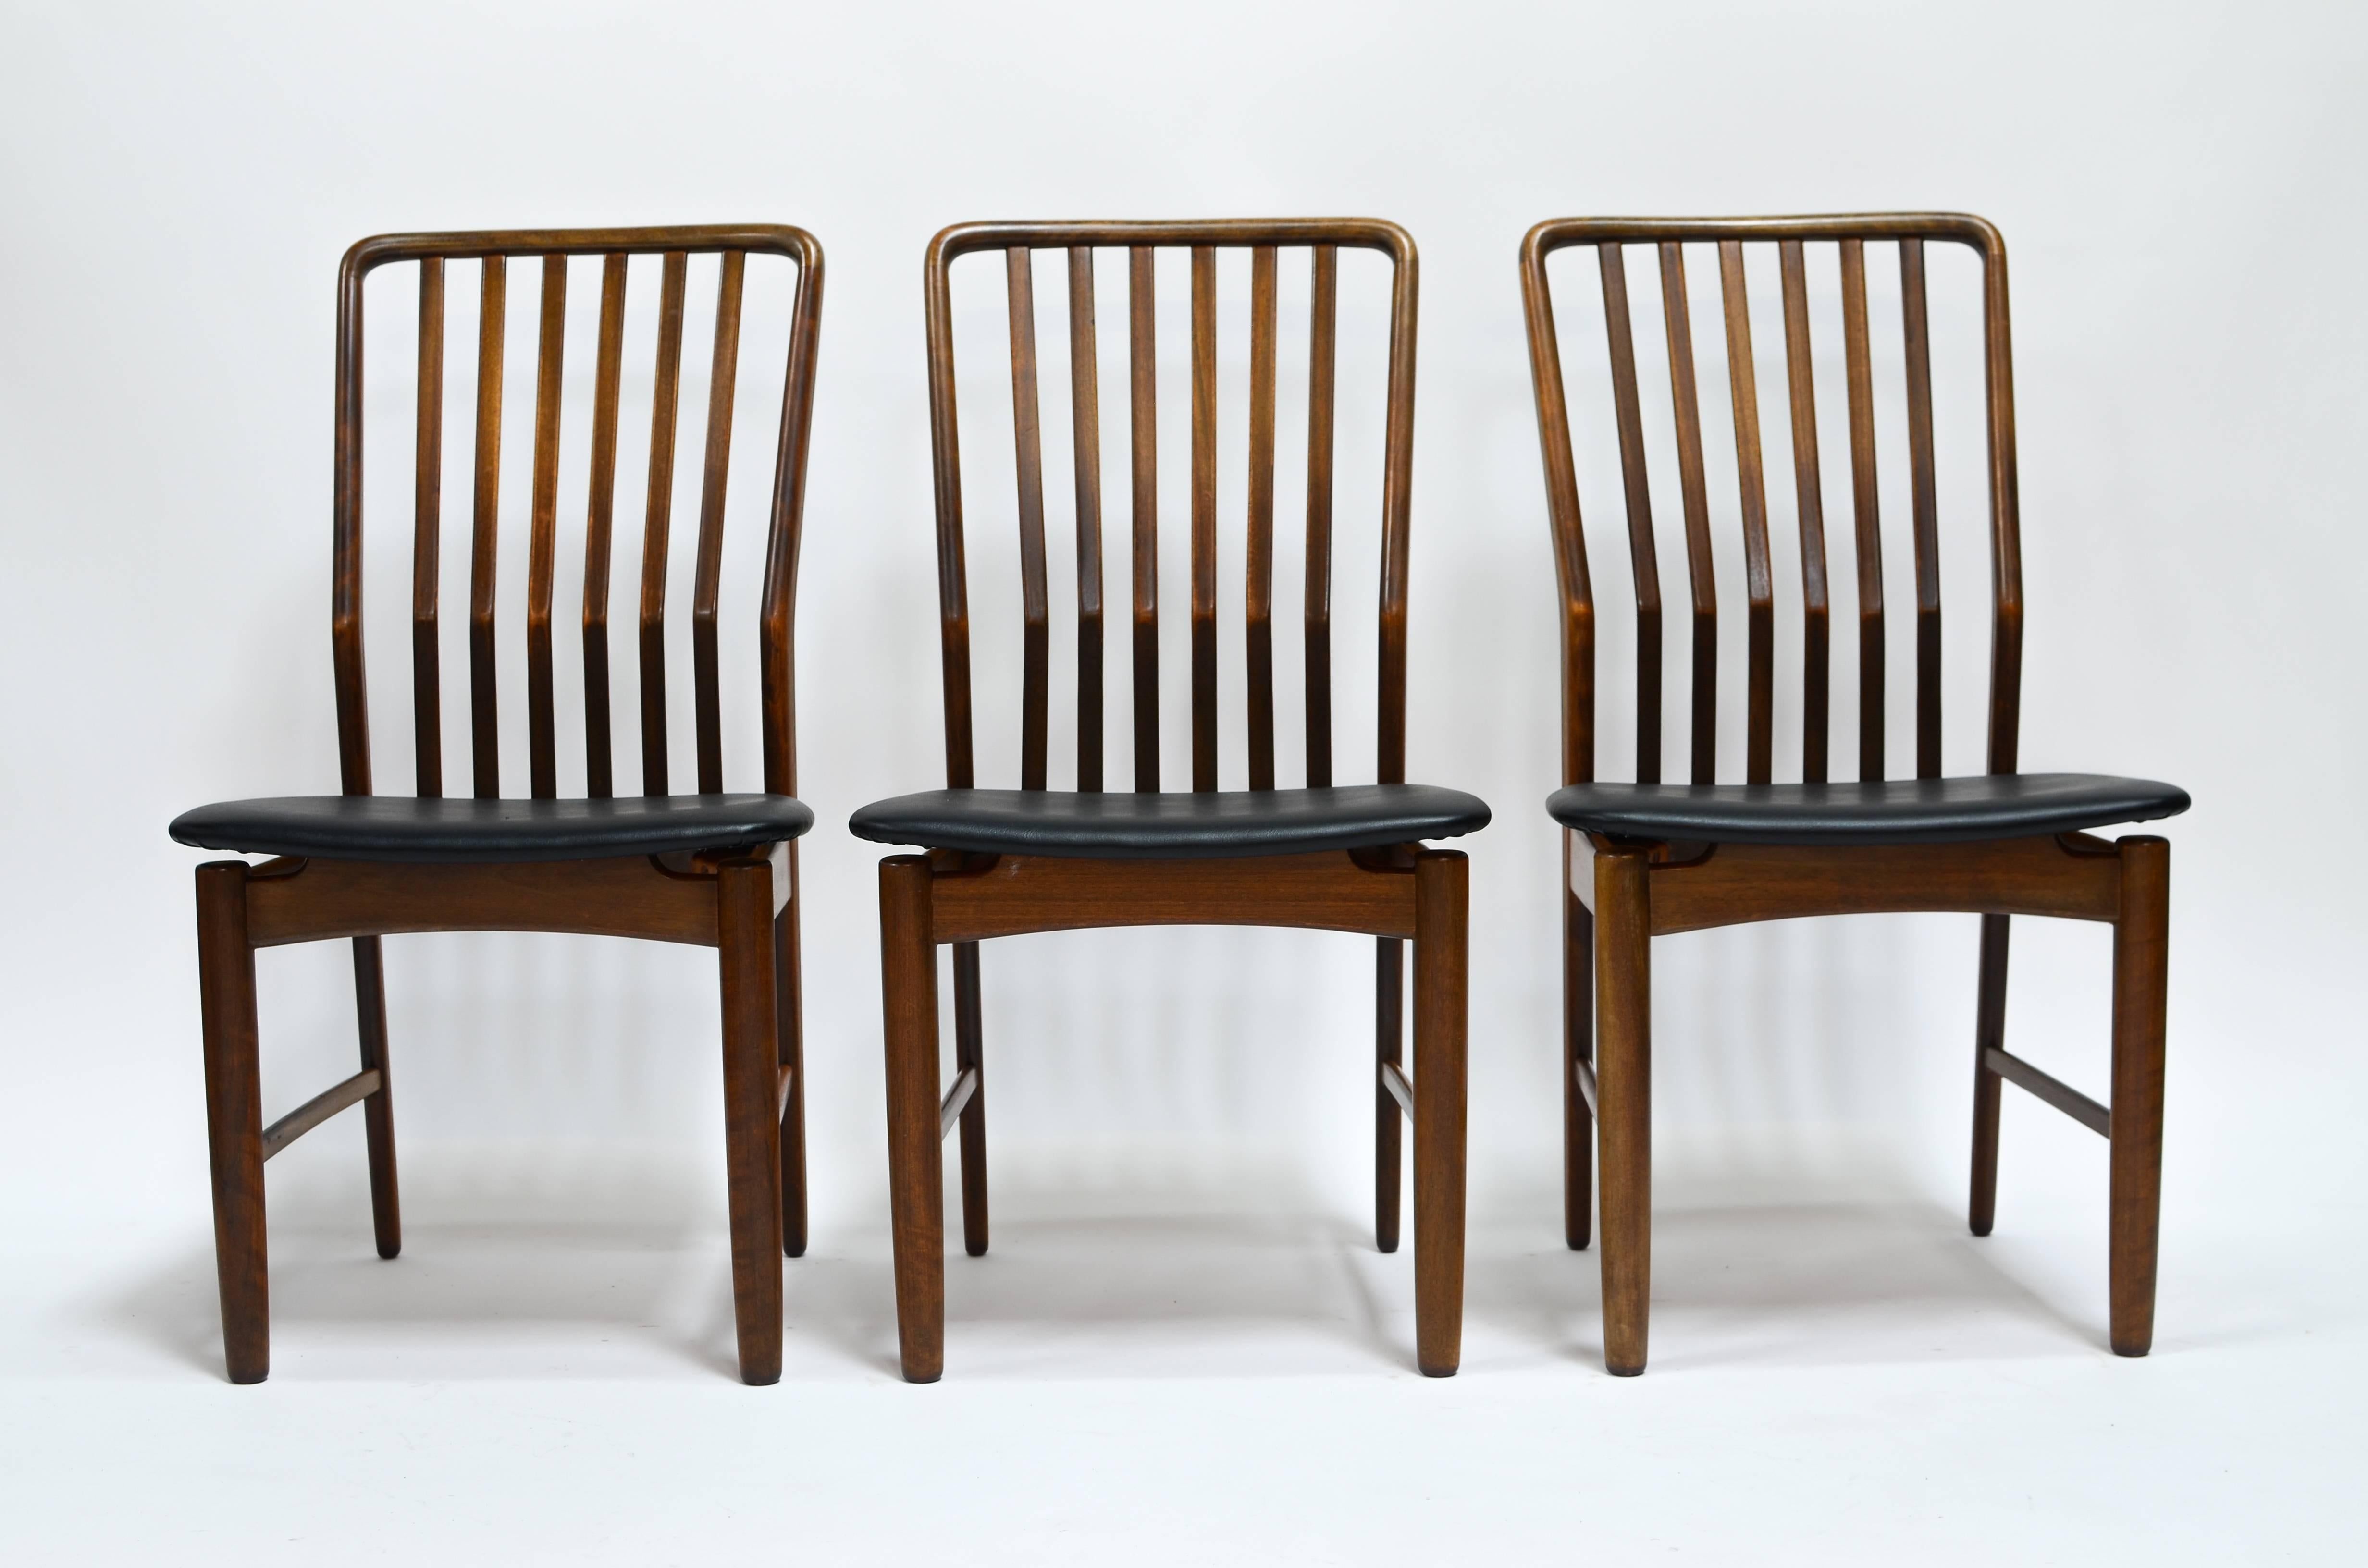 Beautiful set of six Danish modern Walnut dining chairs designed by Svend A. Madsen, imported by Moreddi, circa 1960s. Includes six chairs without armrests, all having curved backs for extra comfort and large seats. A very sturdy design in ready to